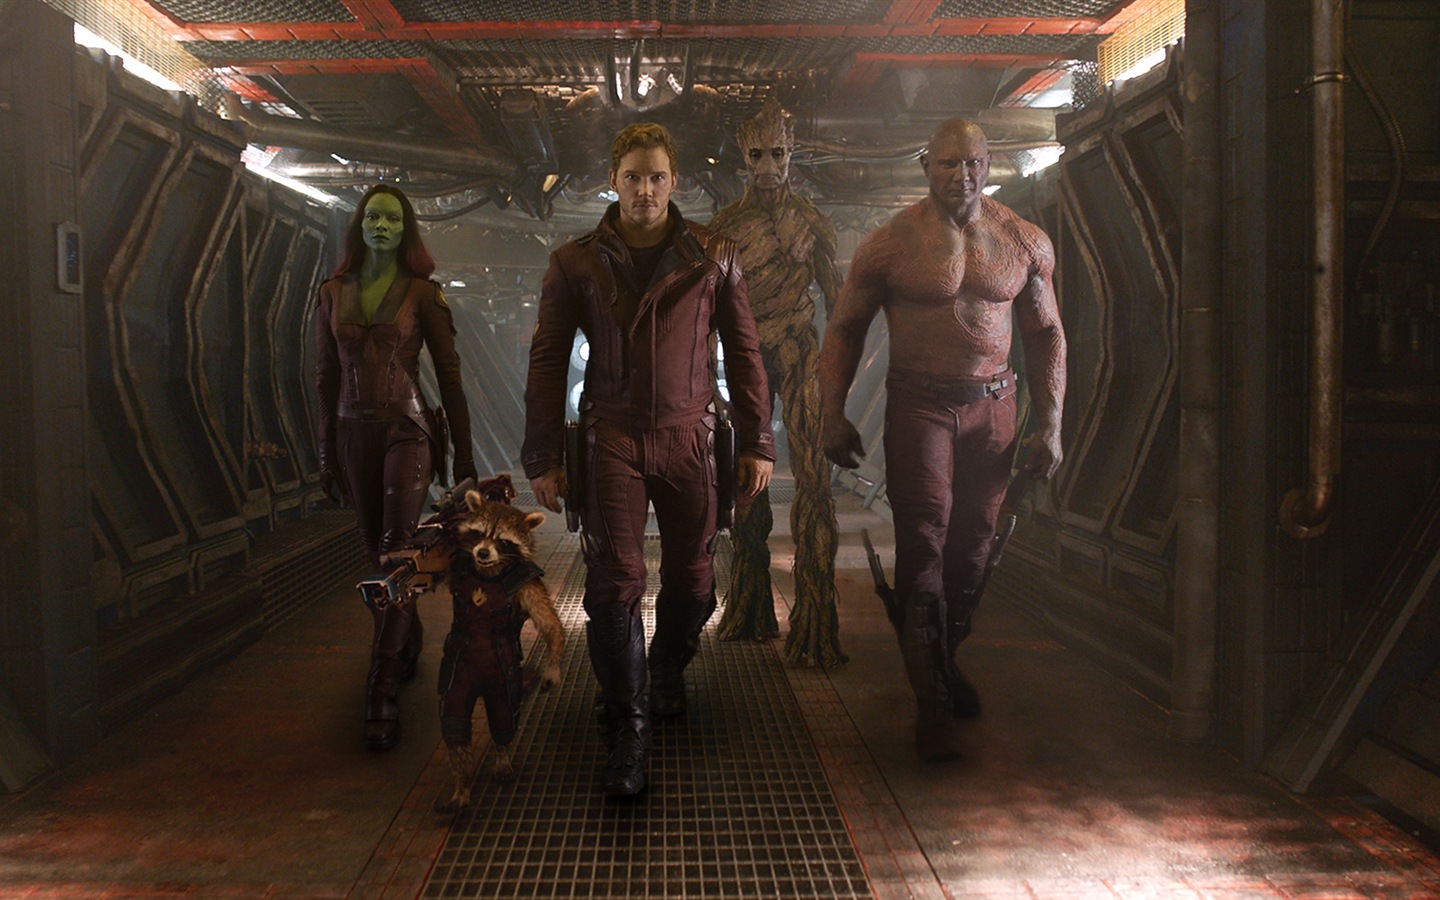 Guardians of the Galaxy 2014 HD movie wallpapers #2 - 1440x900